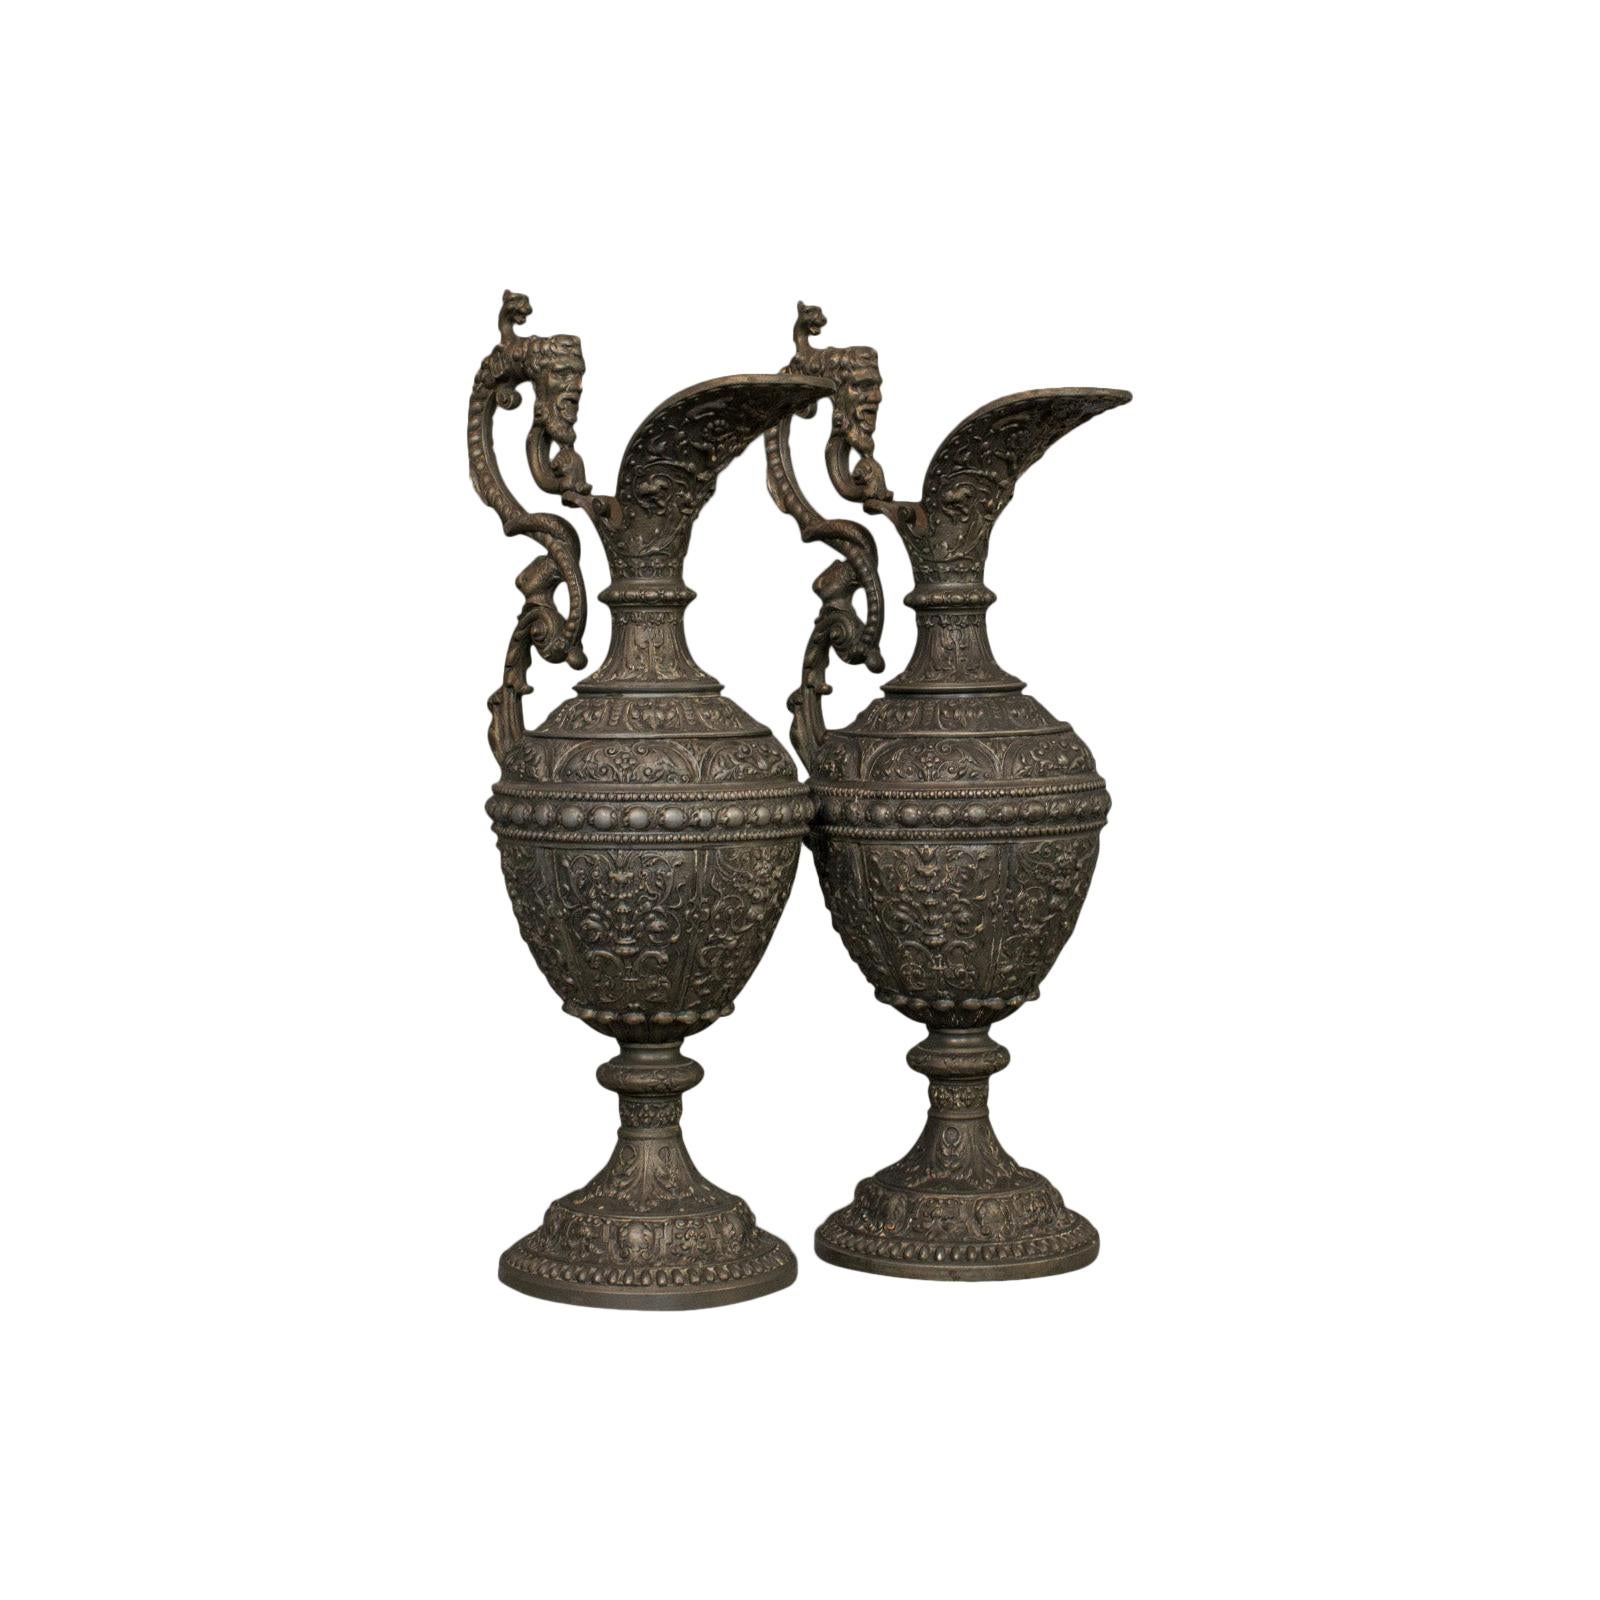 Pair of, Antique Ewers, Classical Taste, French, Bronze Spelter, Jug, Pitcher